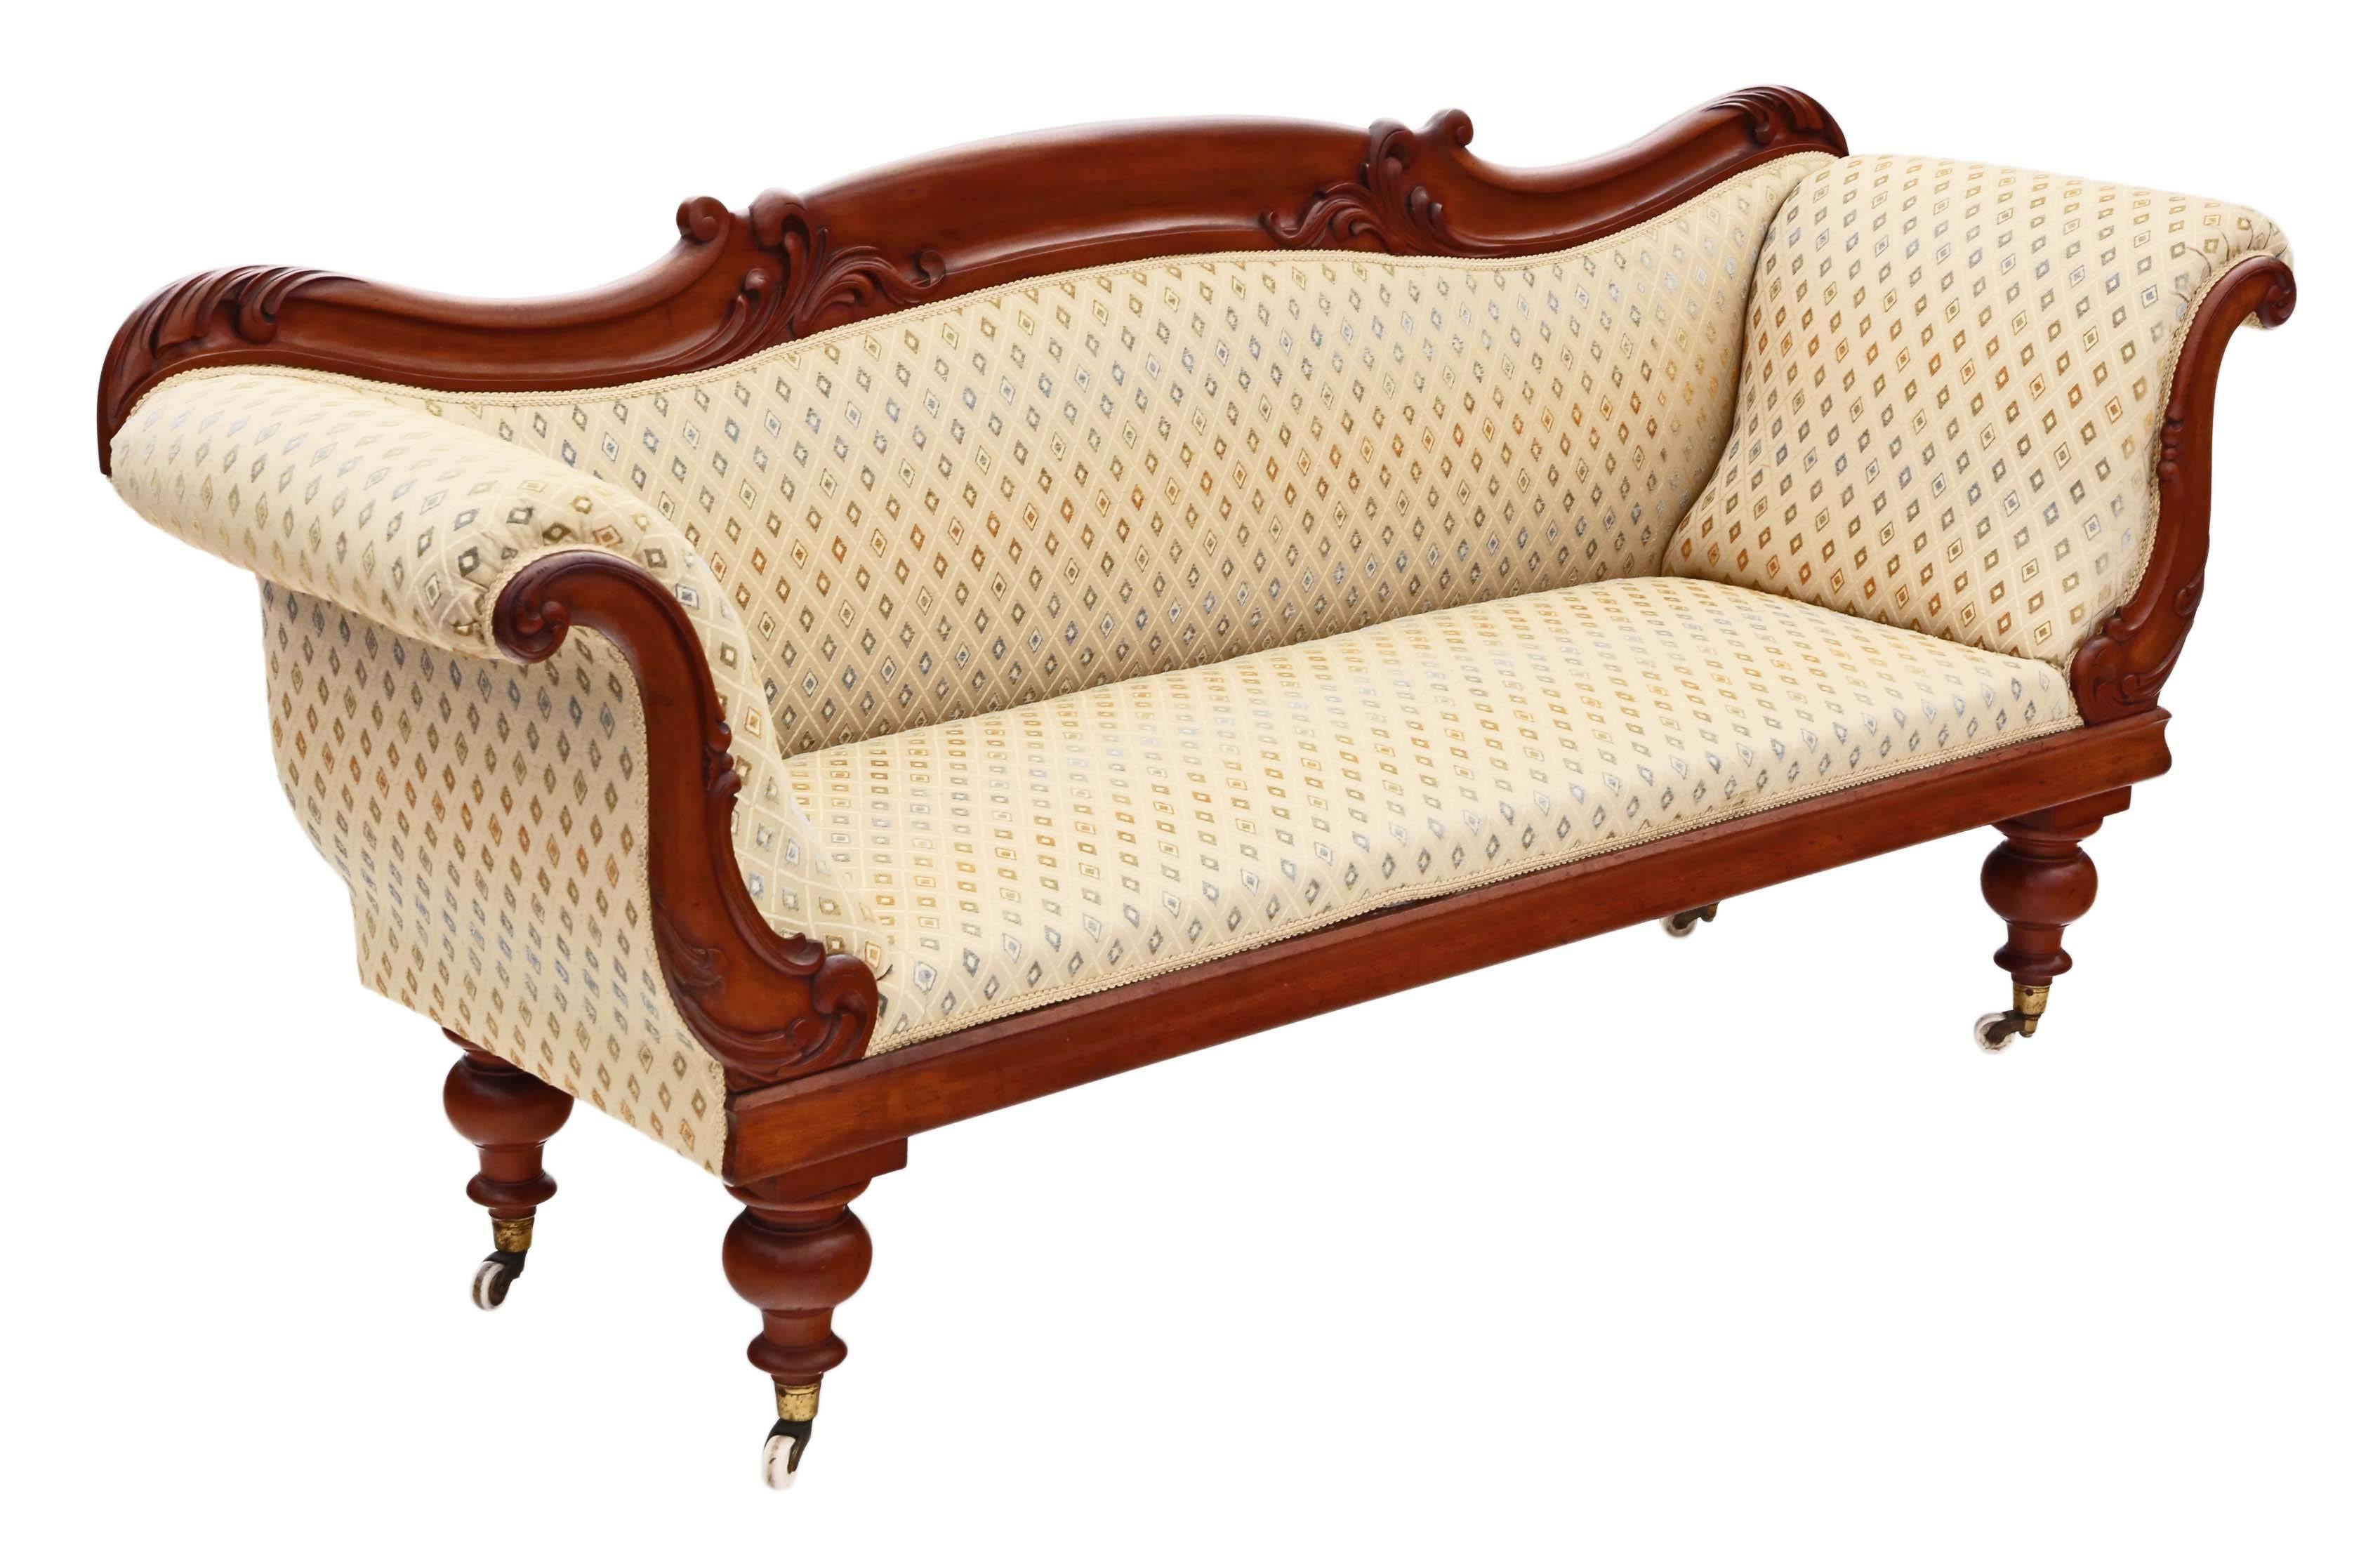 Antique Quality Victorian/William iv Mahogany Scroll Arm Sofa Chaise Longue For Sale 5